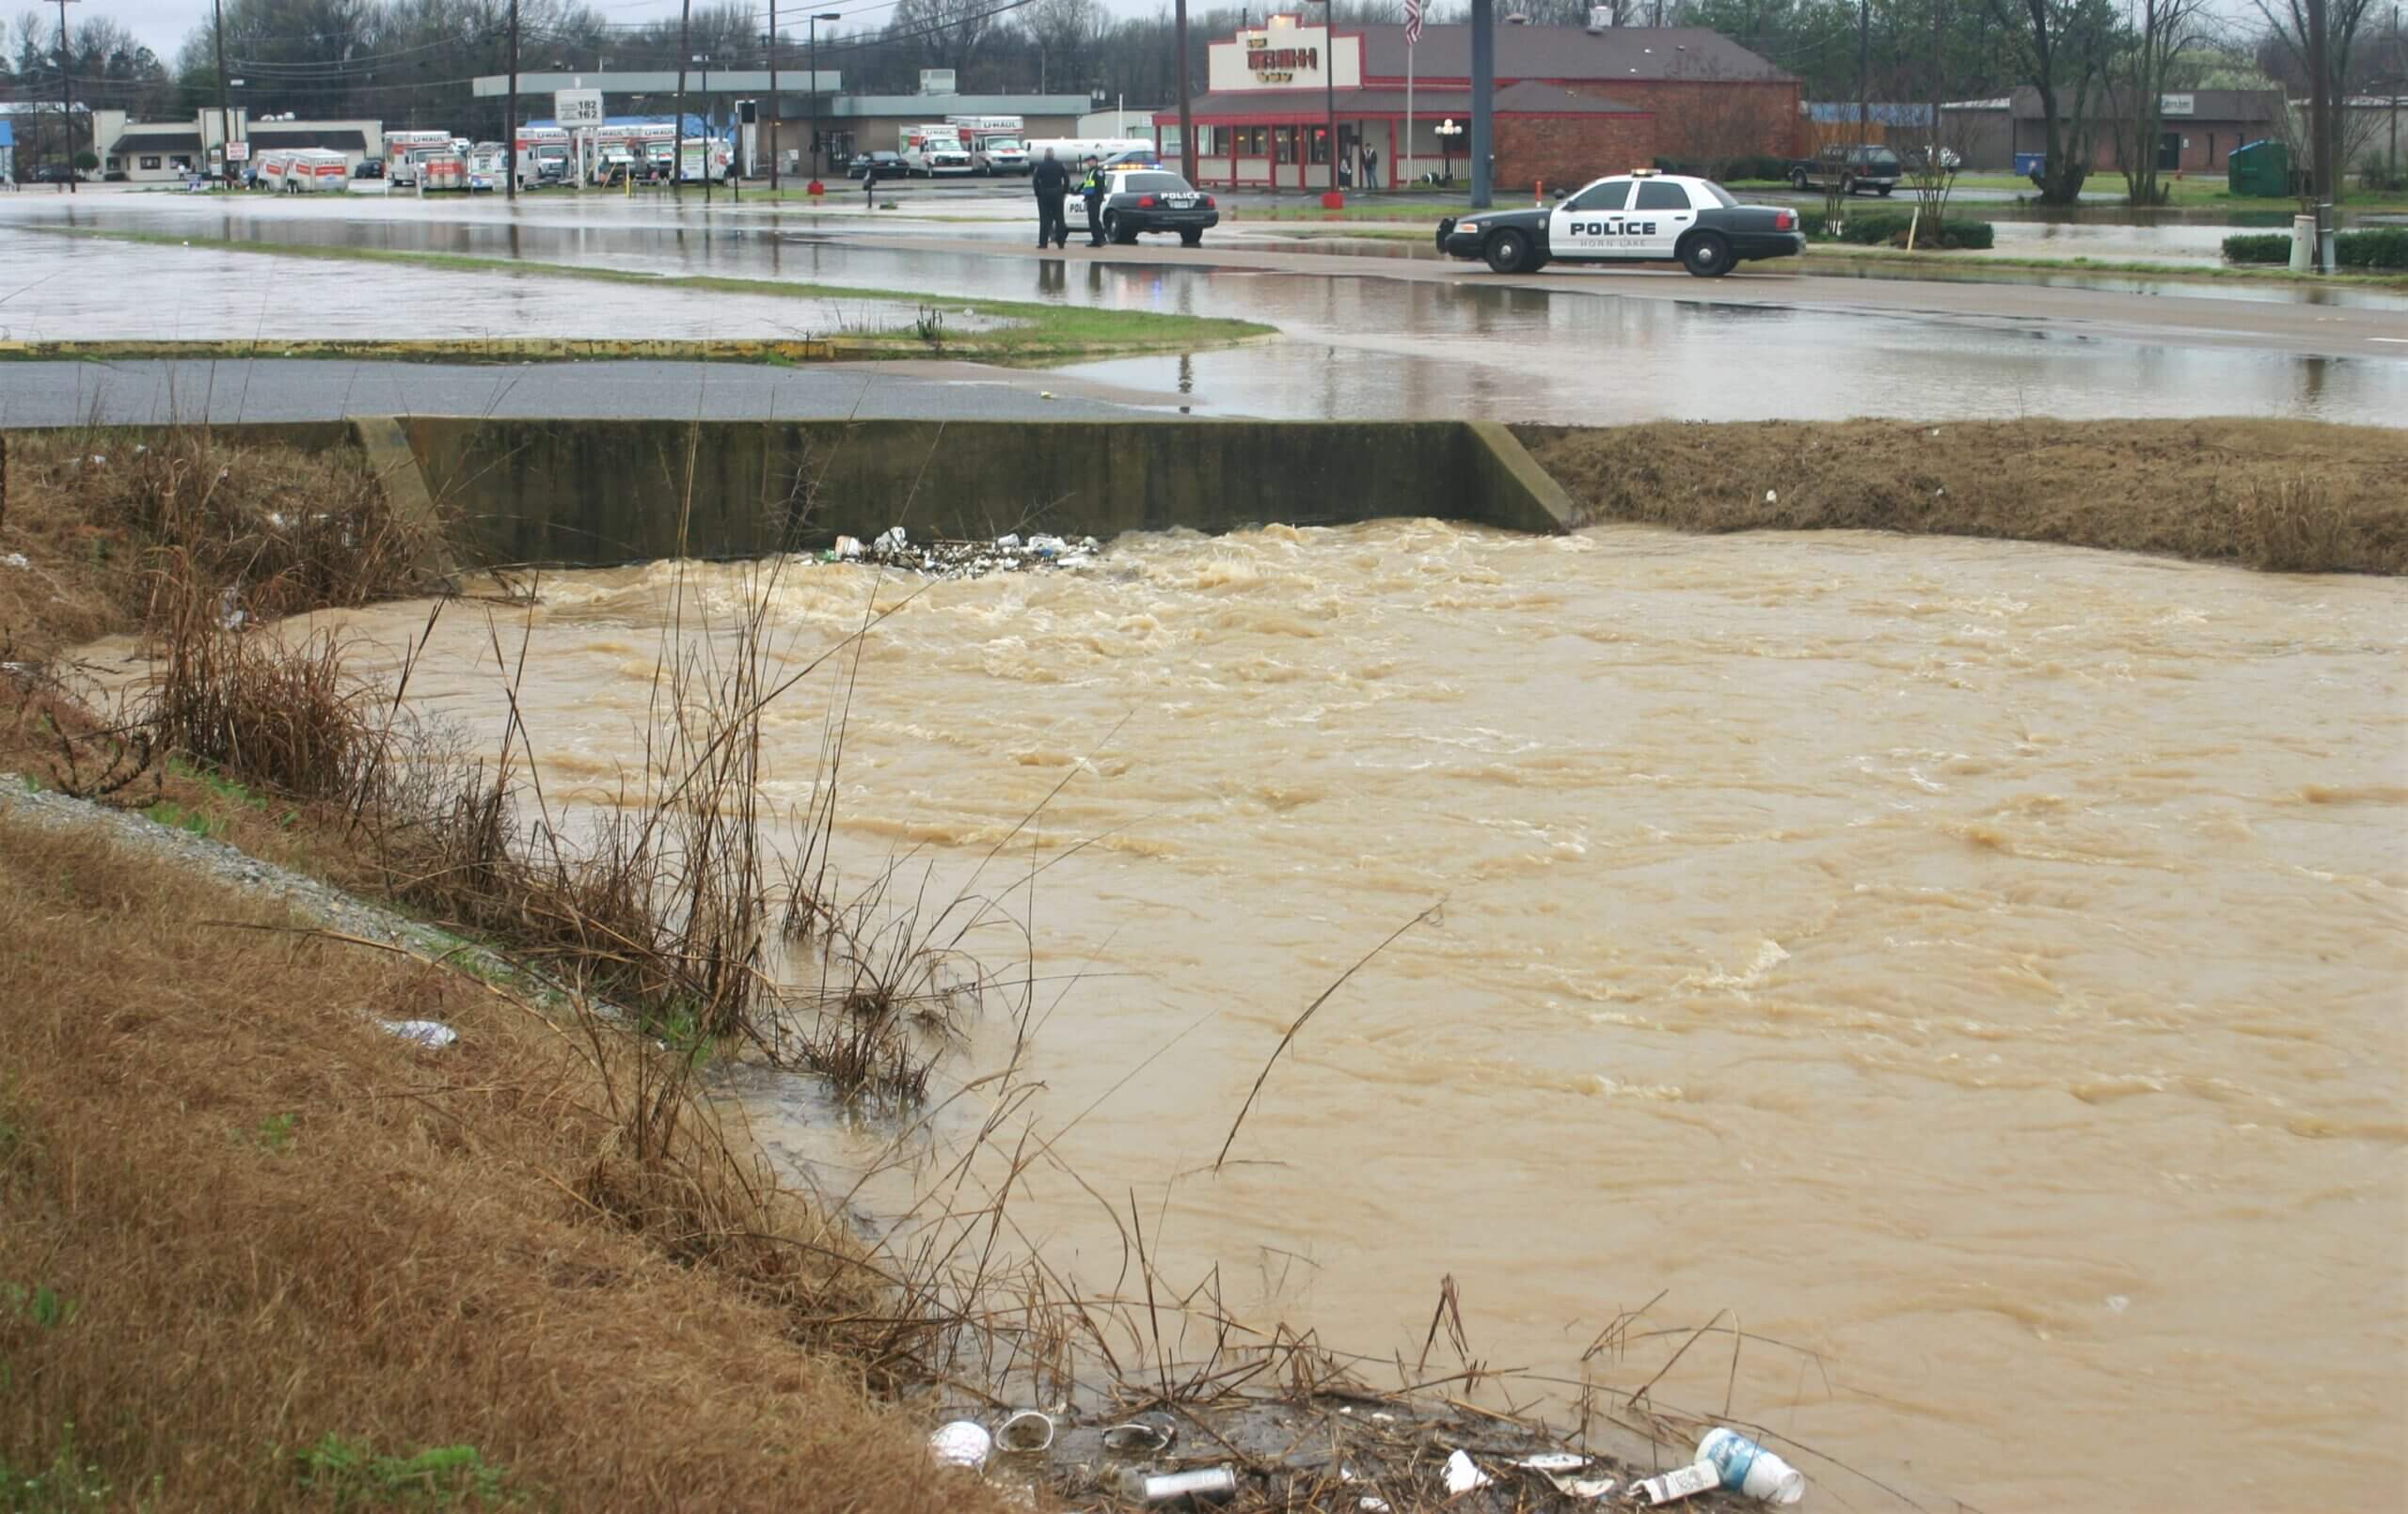 Corps of Engineers to hold public meeting on flooding